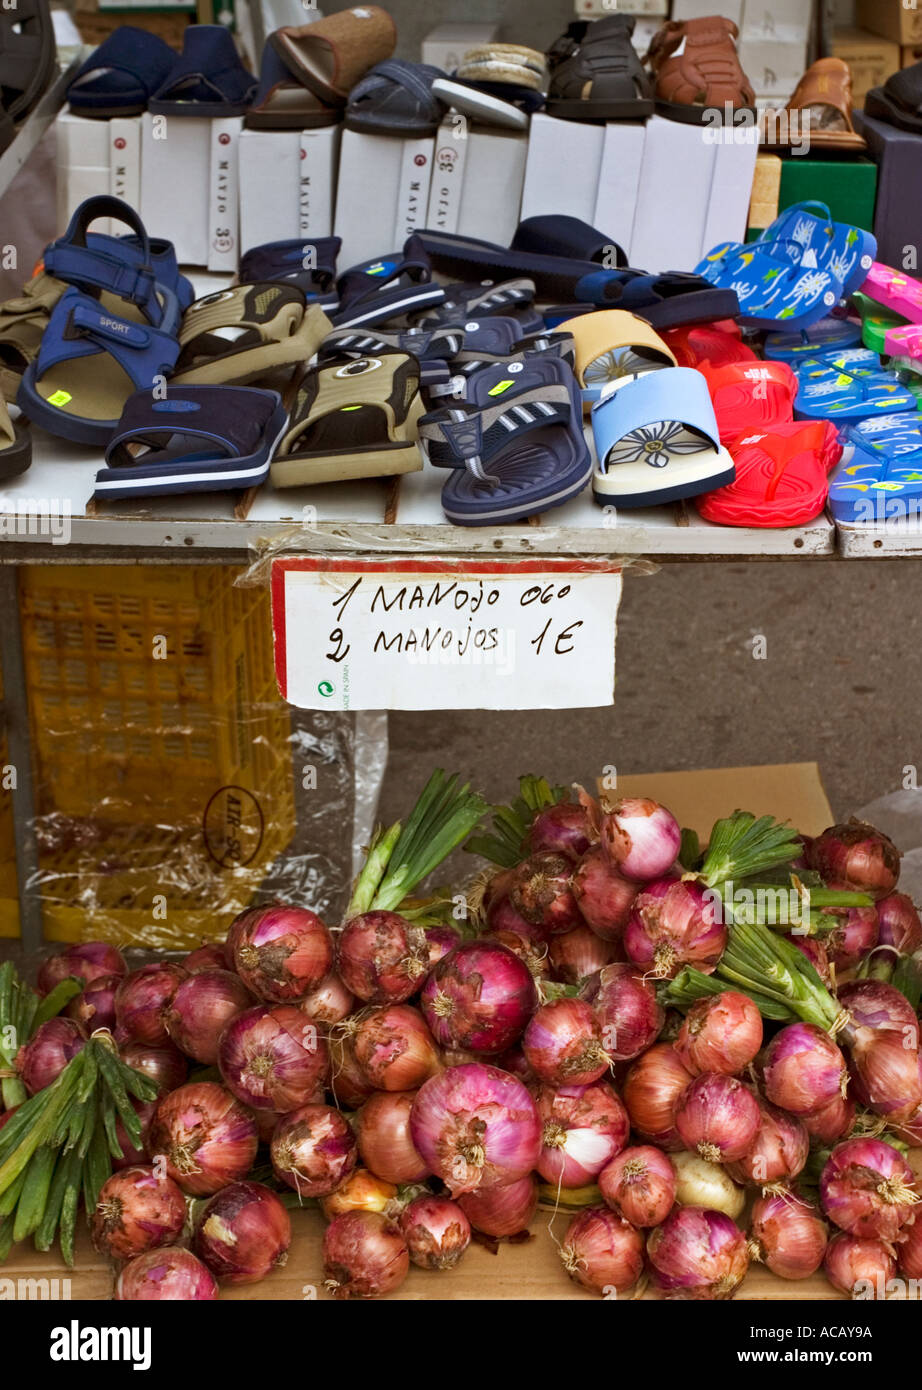 Onions and Shoes for sale on same stall Santa Pola Market near Alicante  Spain Stock Photo - Alamy